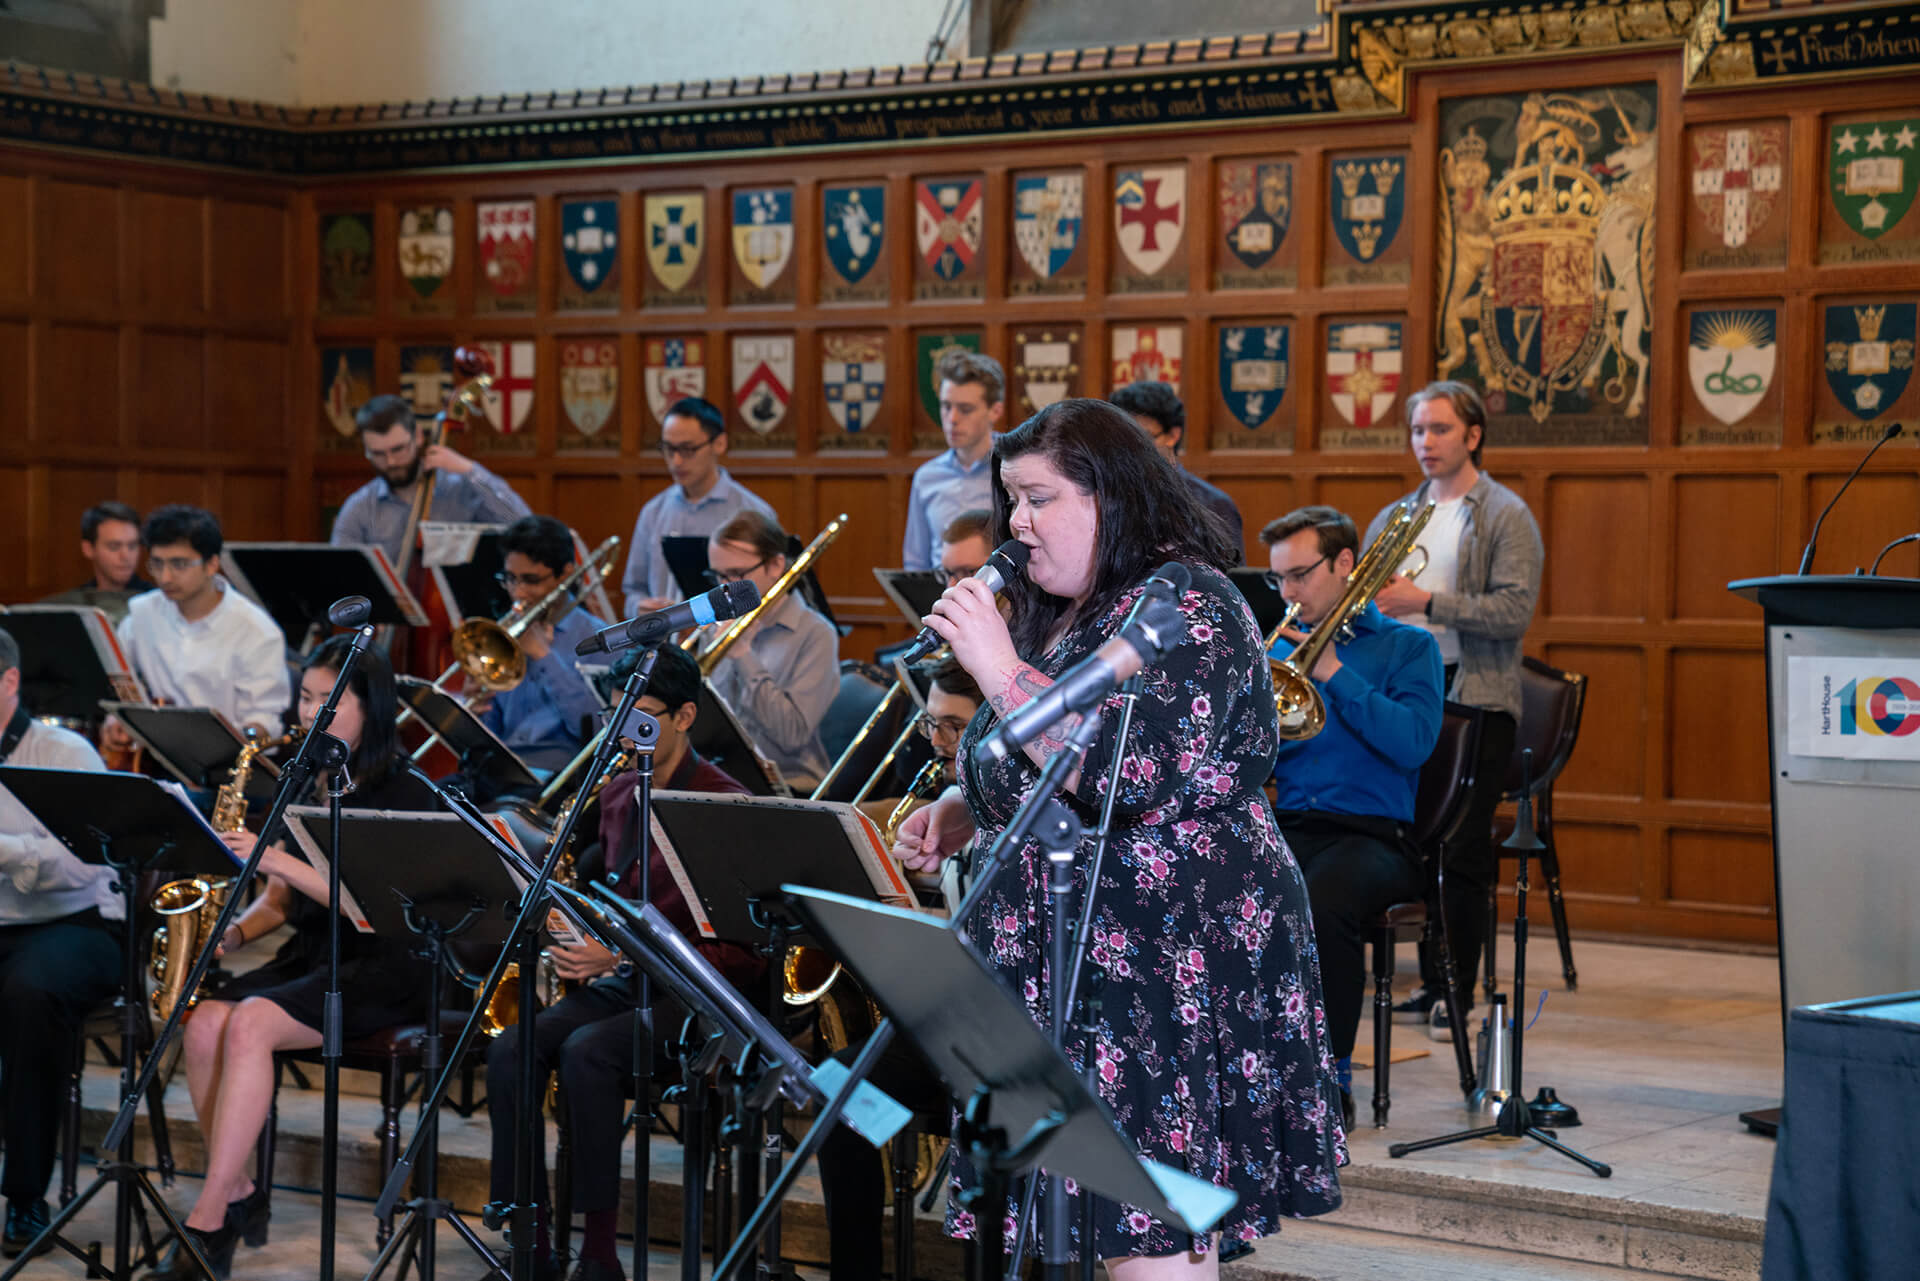 Band sitting and playing their musical instruments a woman standing and singing a large collection of heraldry shields displays on the wall behind them